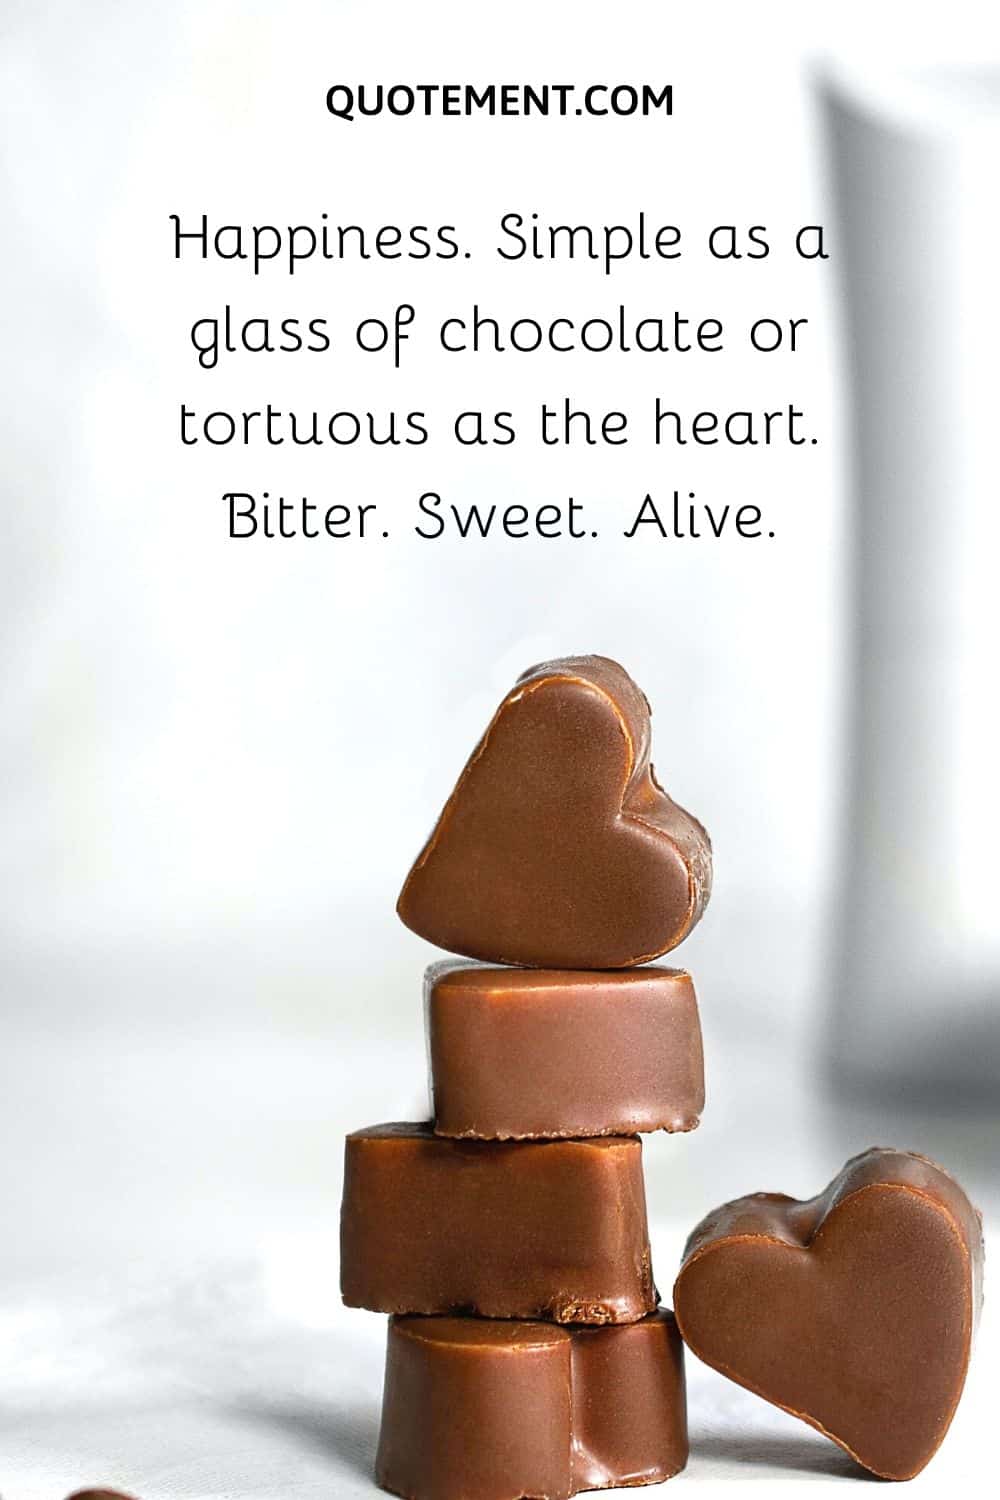 100 Marvelous Chocolate Captions for Instagram With Quotes